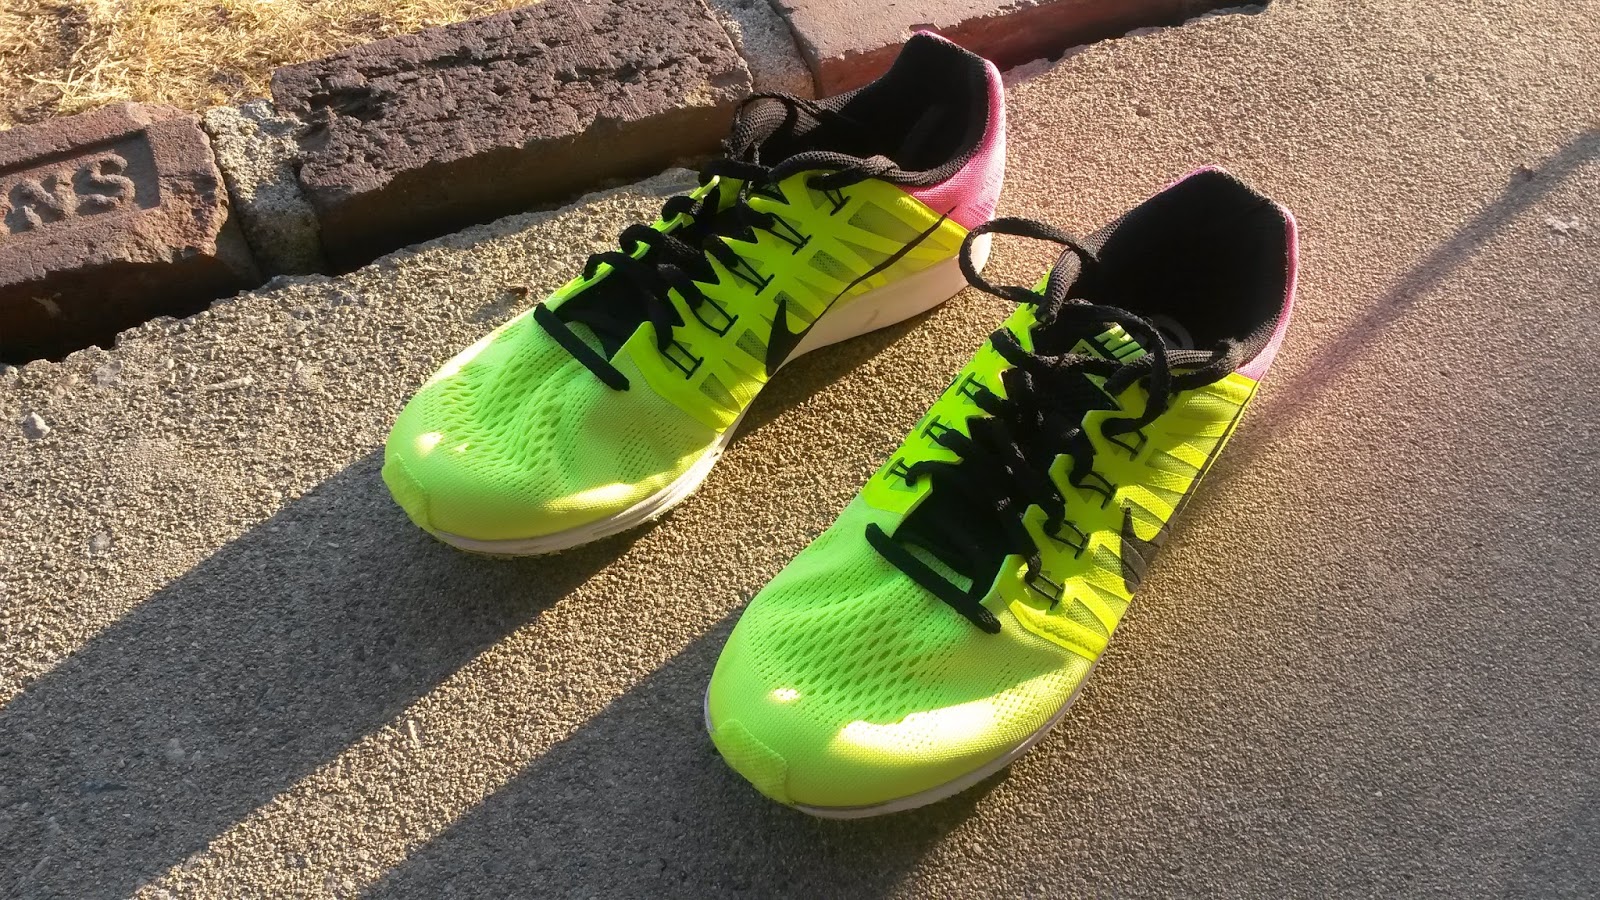 Nike Zoom Speed Racer 6 Review - DOCTORS OF RUNNING